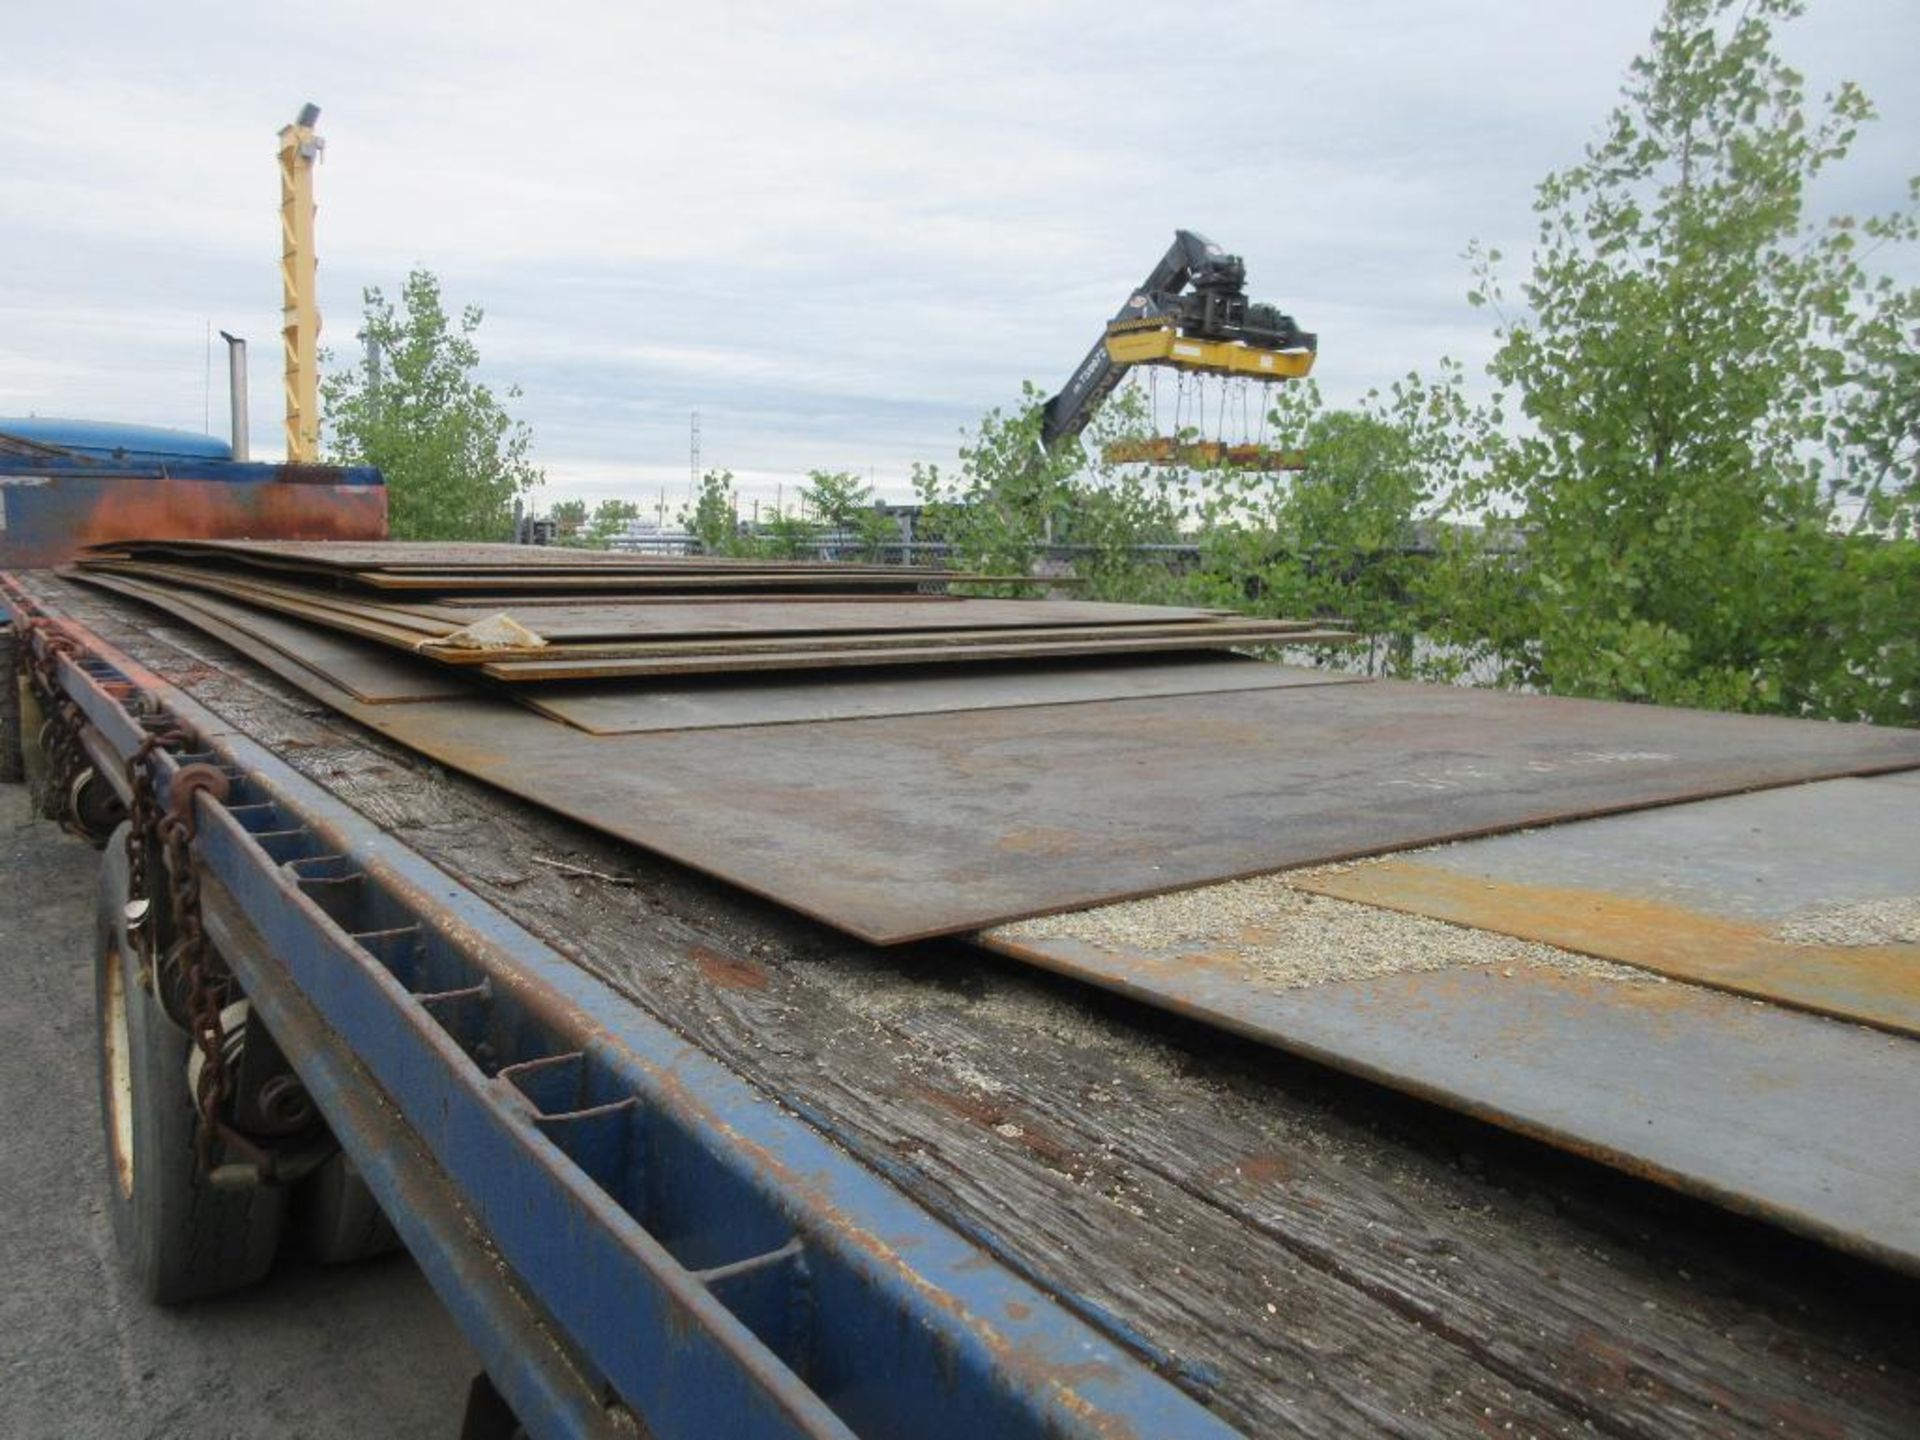 LOT OF 27 SHEETS OF PLATE STEEL ON TRAILER (NO TRAILER), TOTAL WEIGHT 293,559 LBS, SIZES PER PHOTO ( - Image 5 of 14